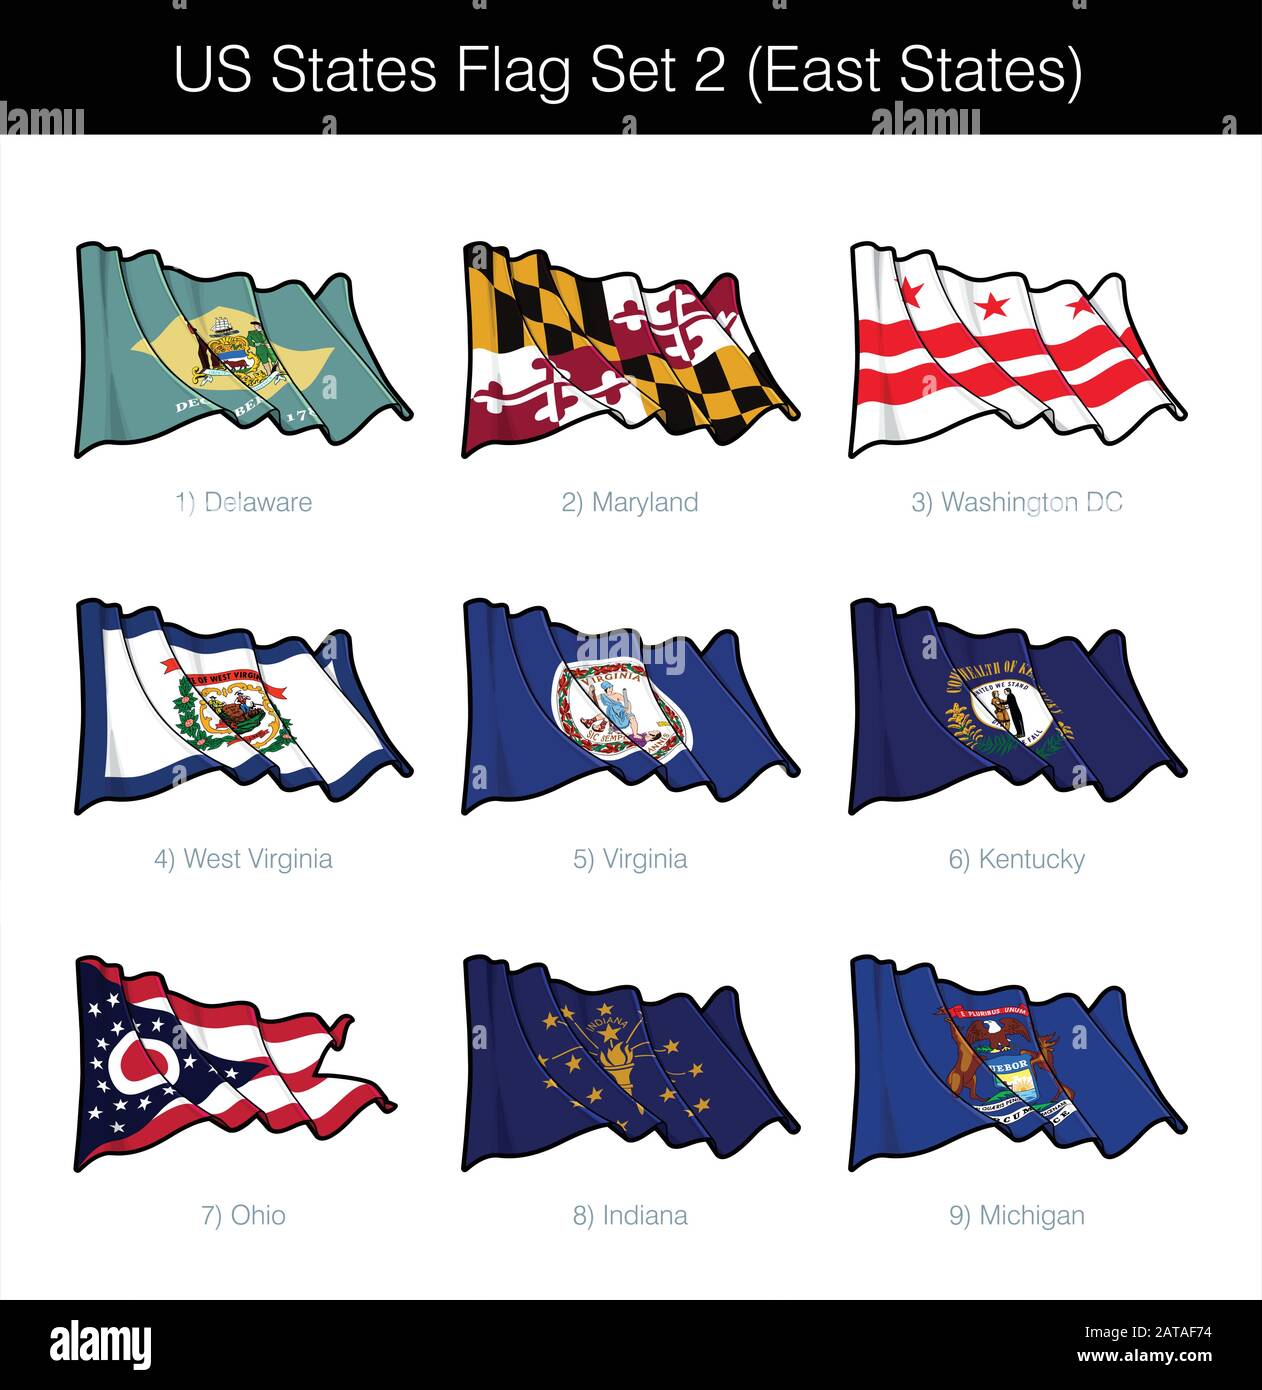 US East States Flag Set. The set includes the waving flags of Washington DC, Maryland, Delaware, West Virginia, Virginia, Kentucky, Ohio, Indiana n Mi Stock Vector